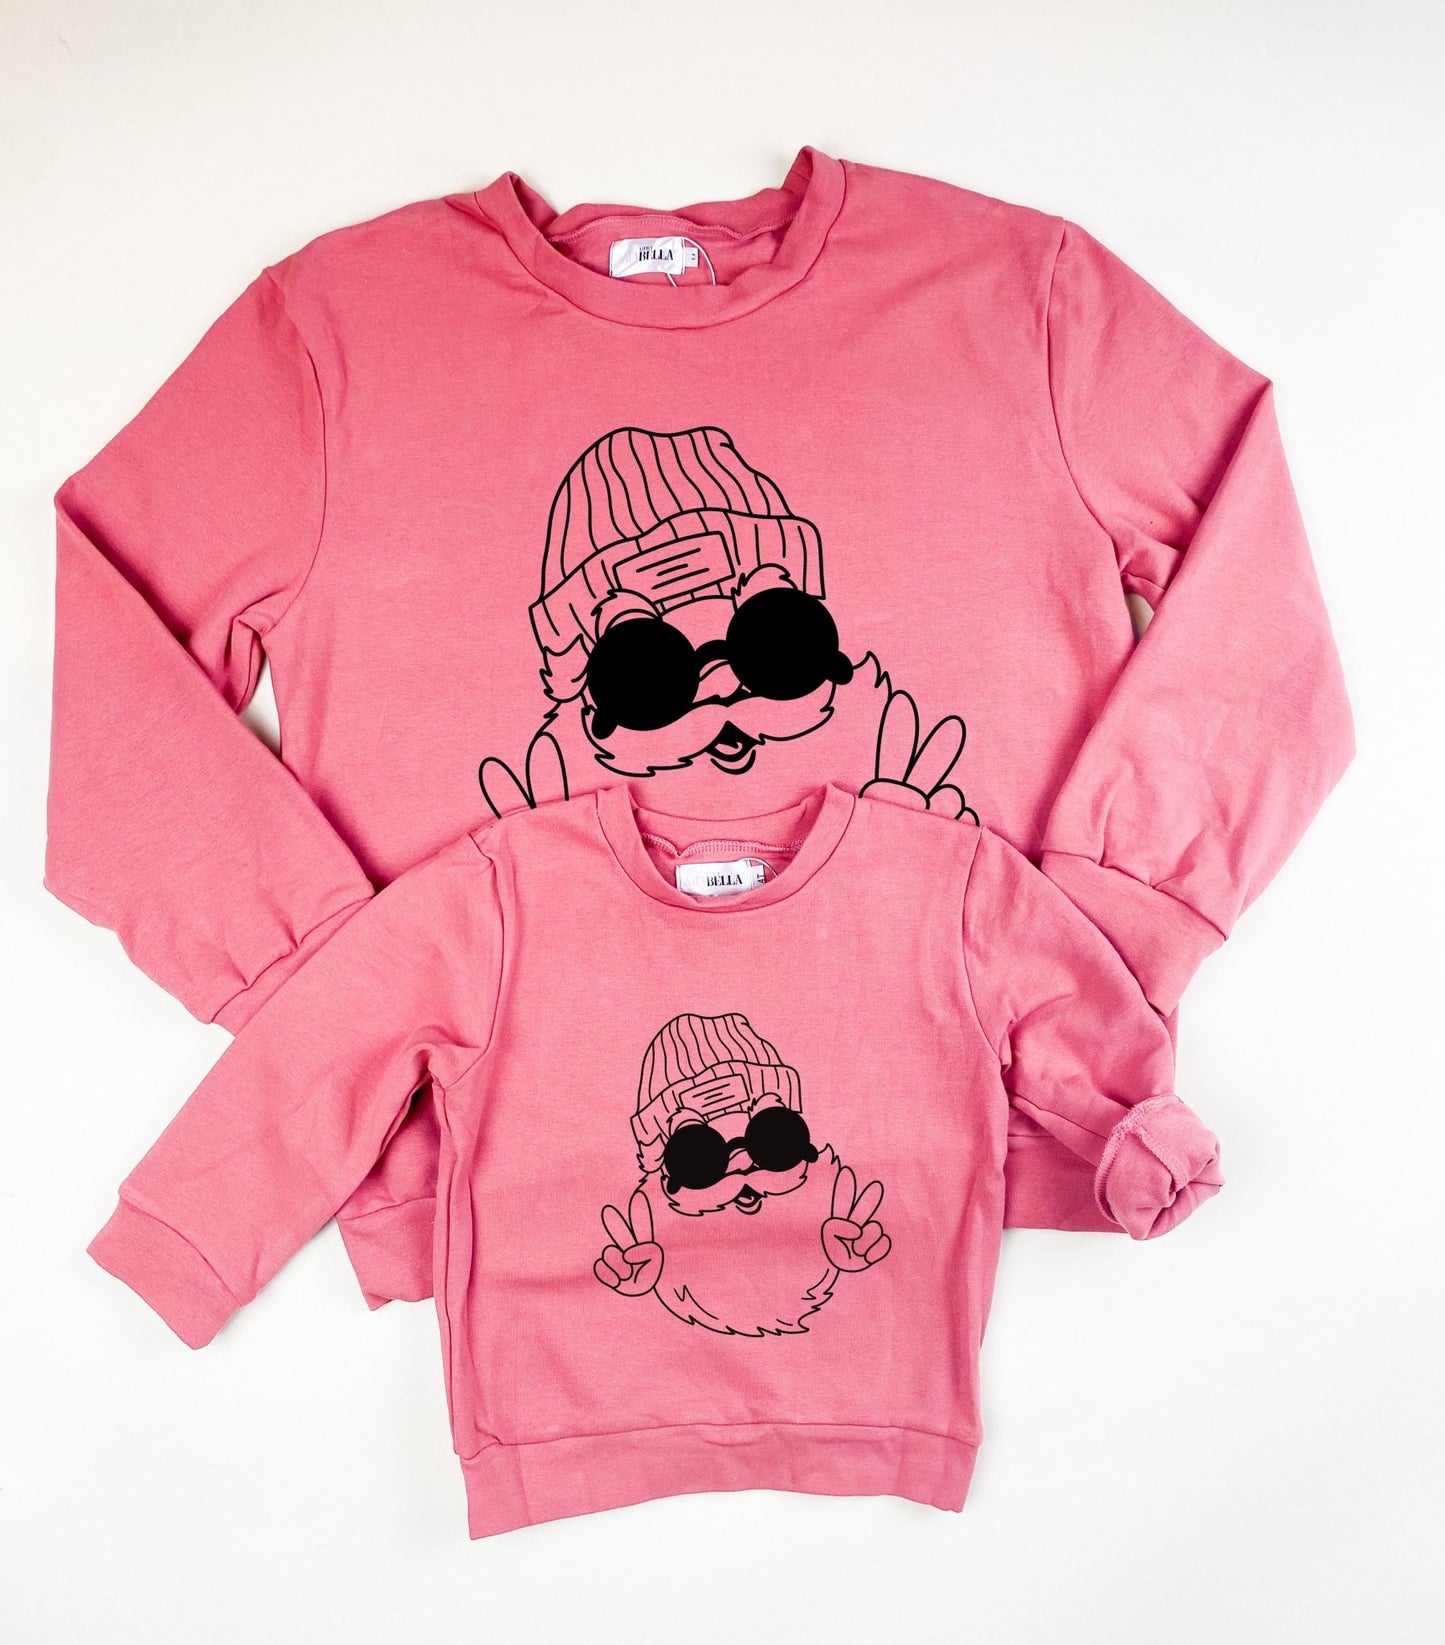 Santas Mauve Mommy and Me Matching Crewneck Sweaters - LITTLE MIA BELLA